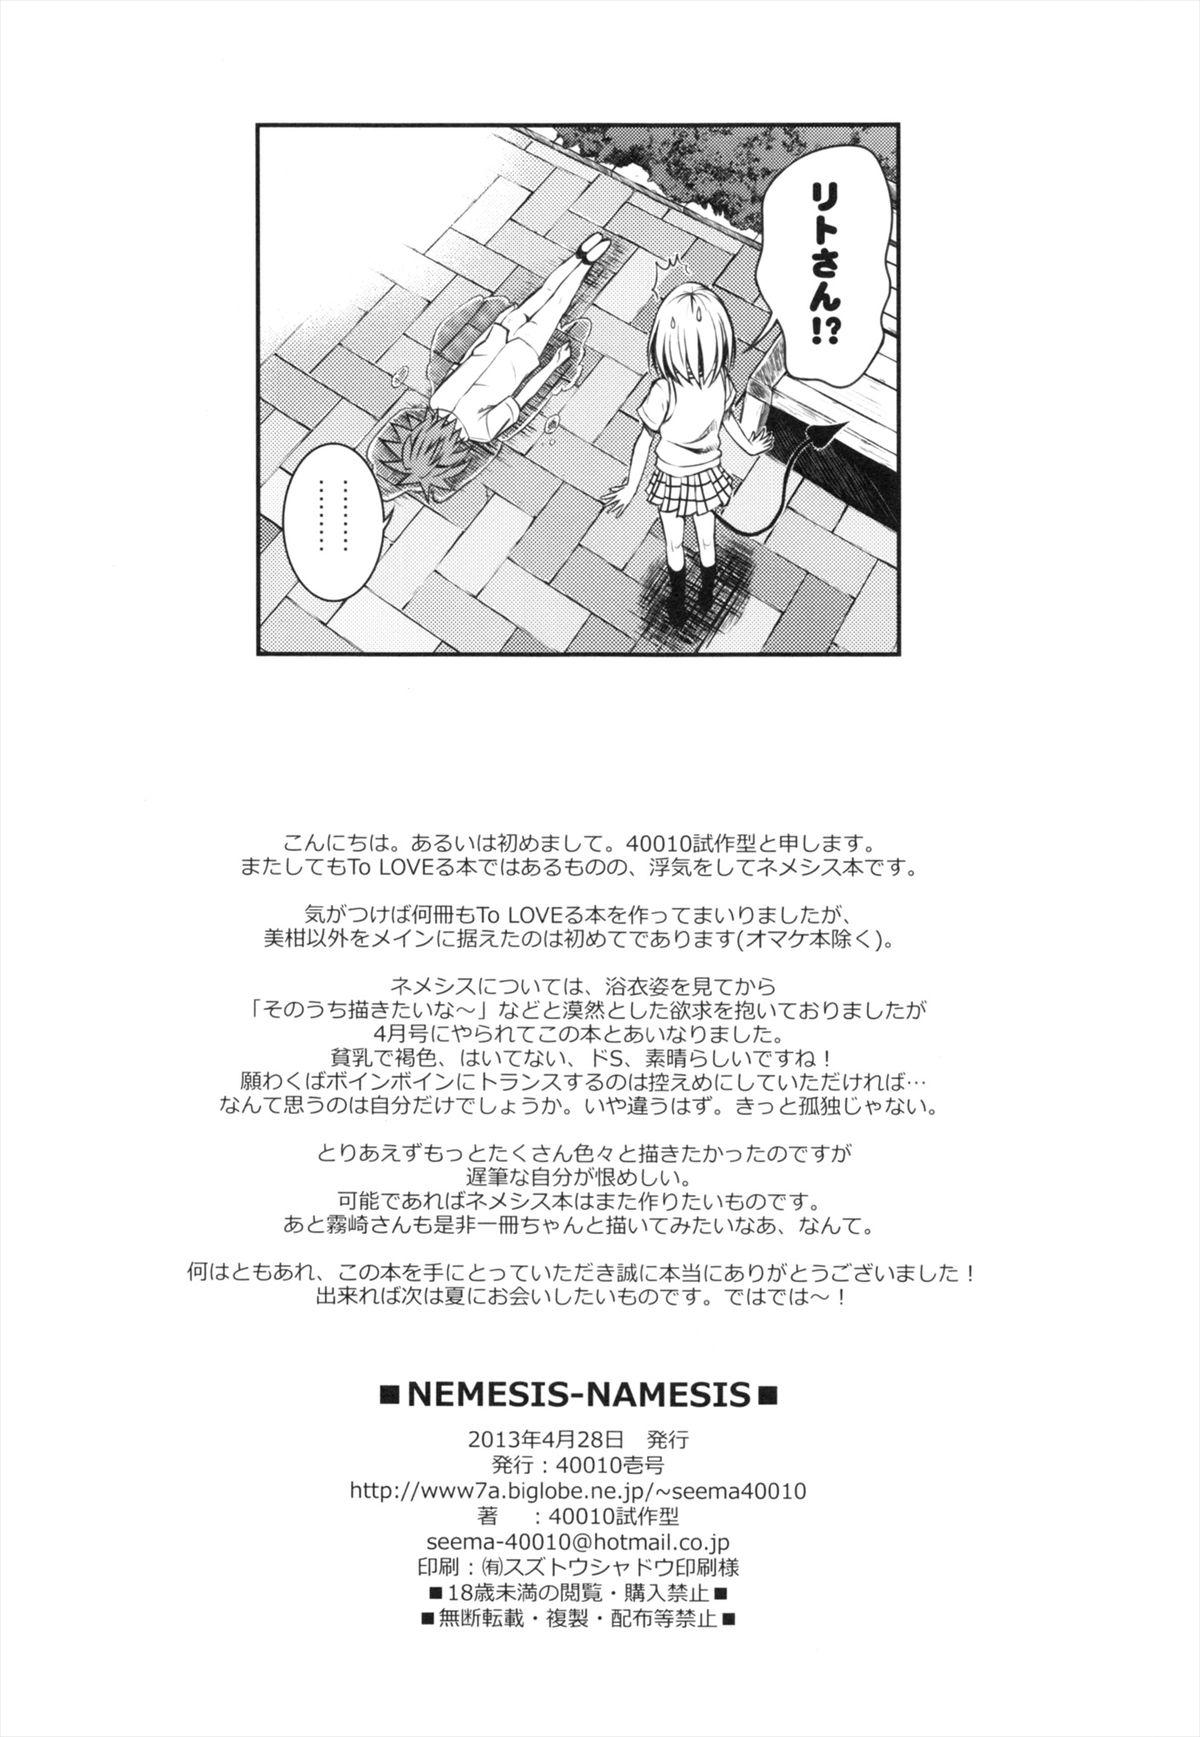 Old Vs Young NEMESIS-NAMESIS - To love-ru Family Sex - Page 26